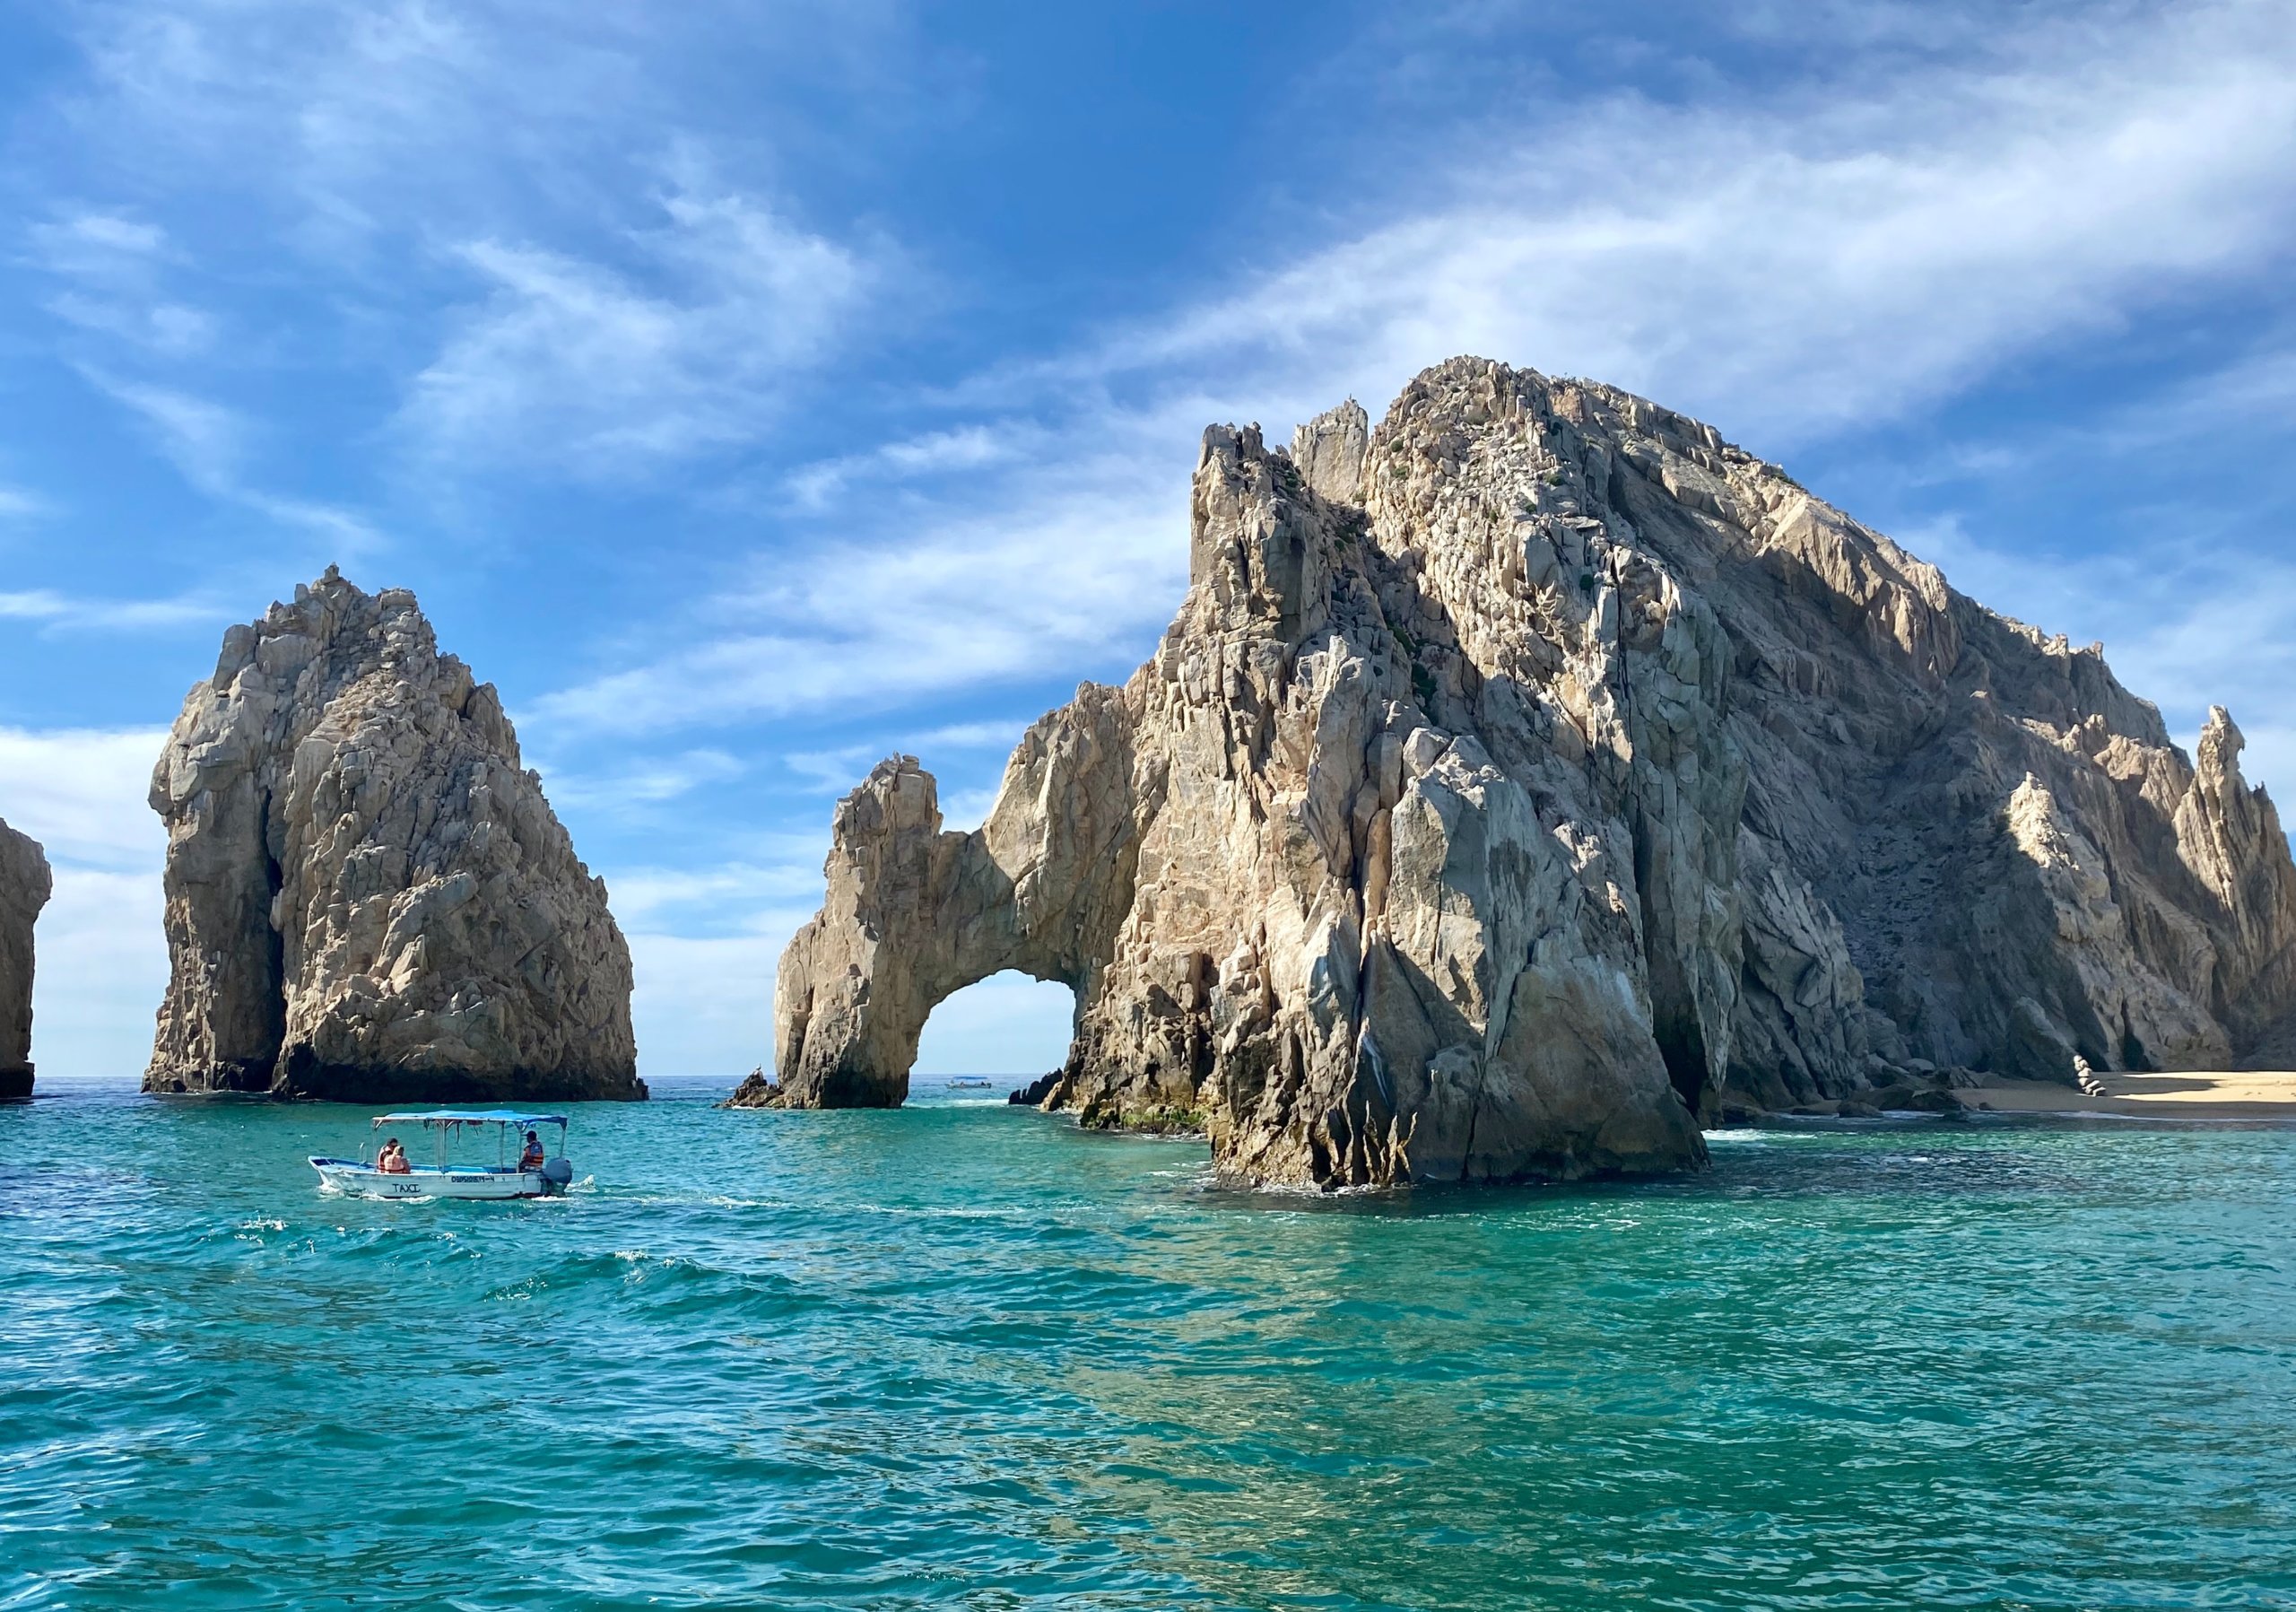 Arched rock formation in blue water